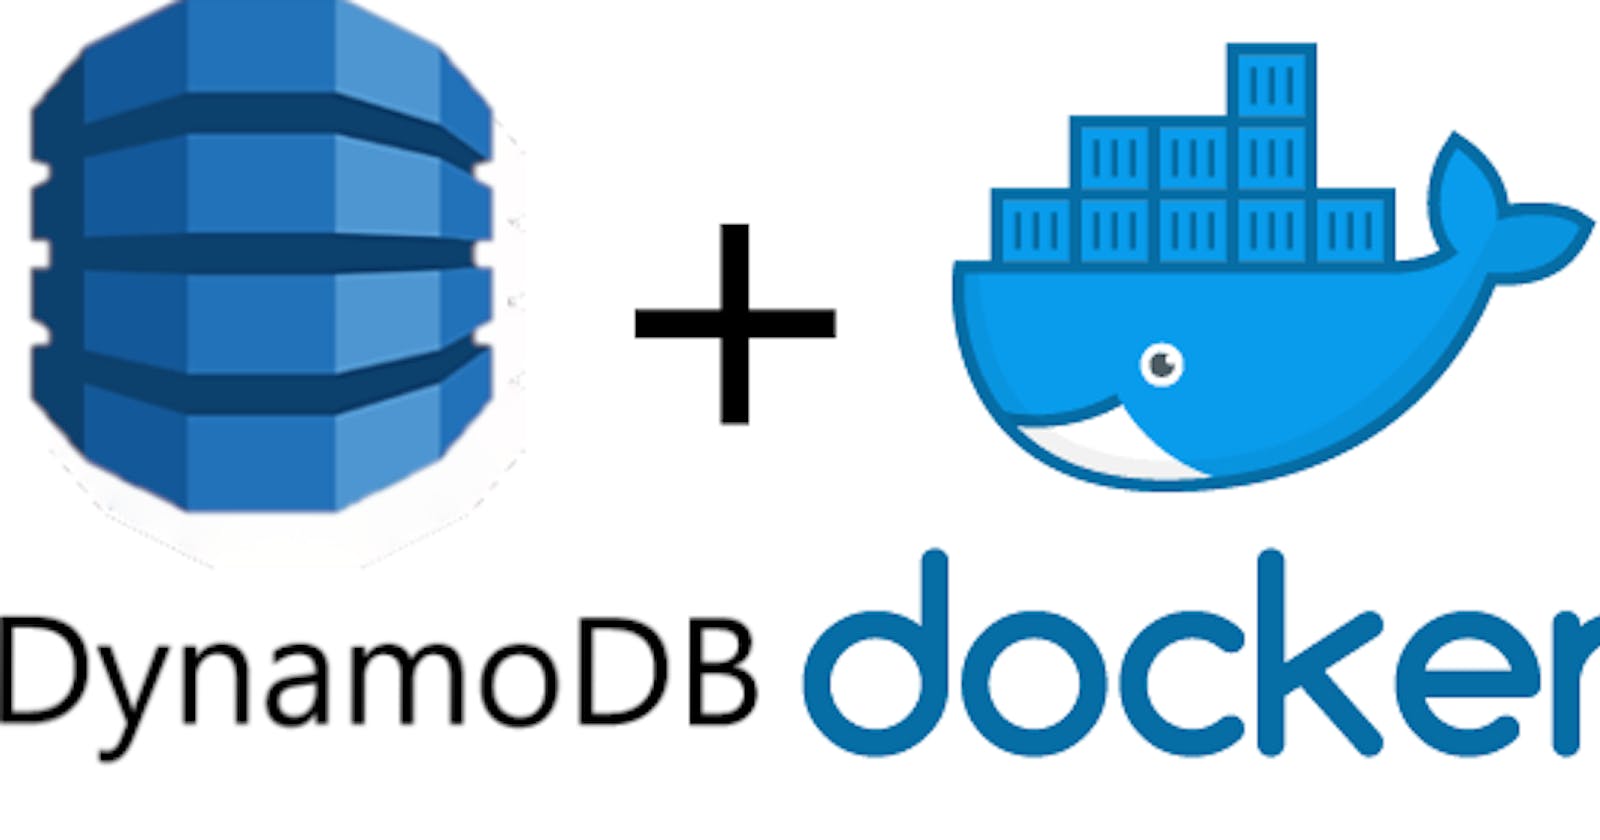 How to Containerize a Local DynamoDb